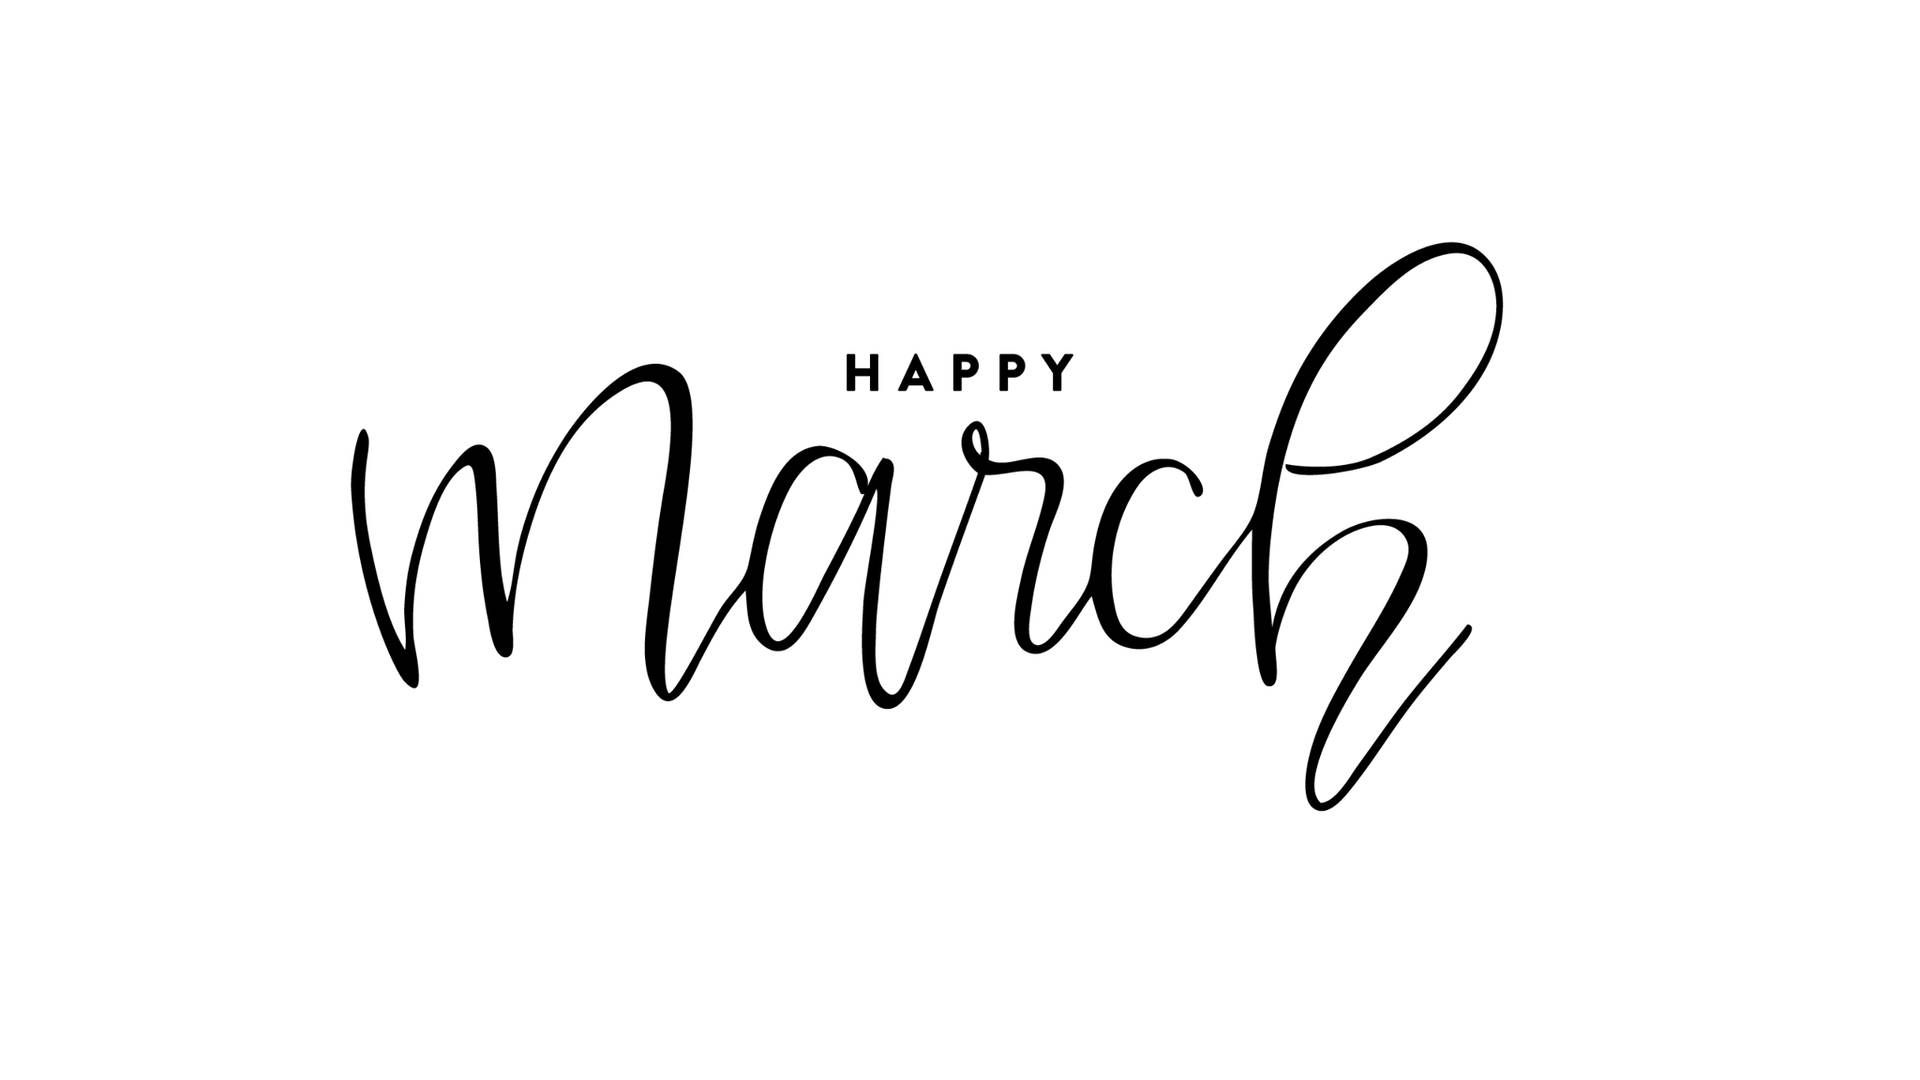 Free March Wallpaper Downloads, March Wallpaper for FREE